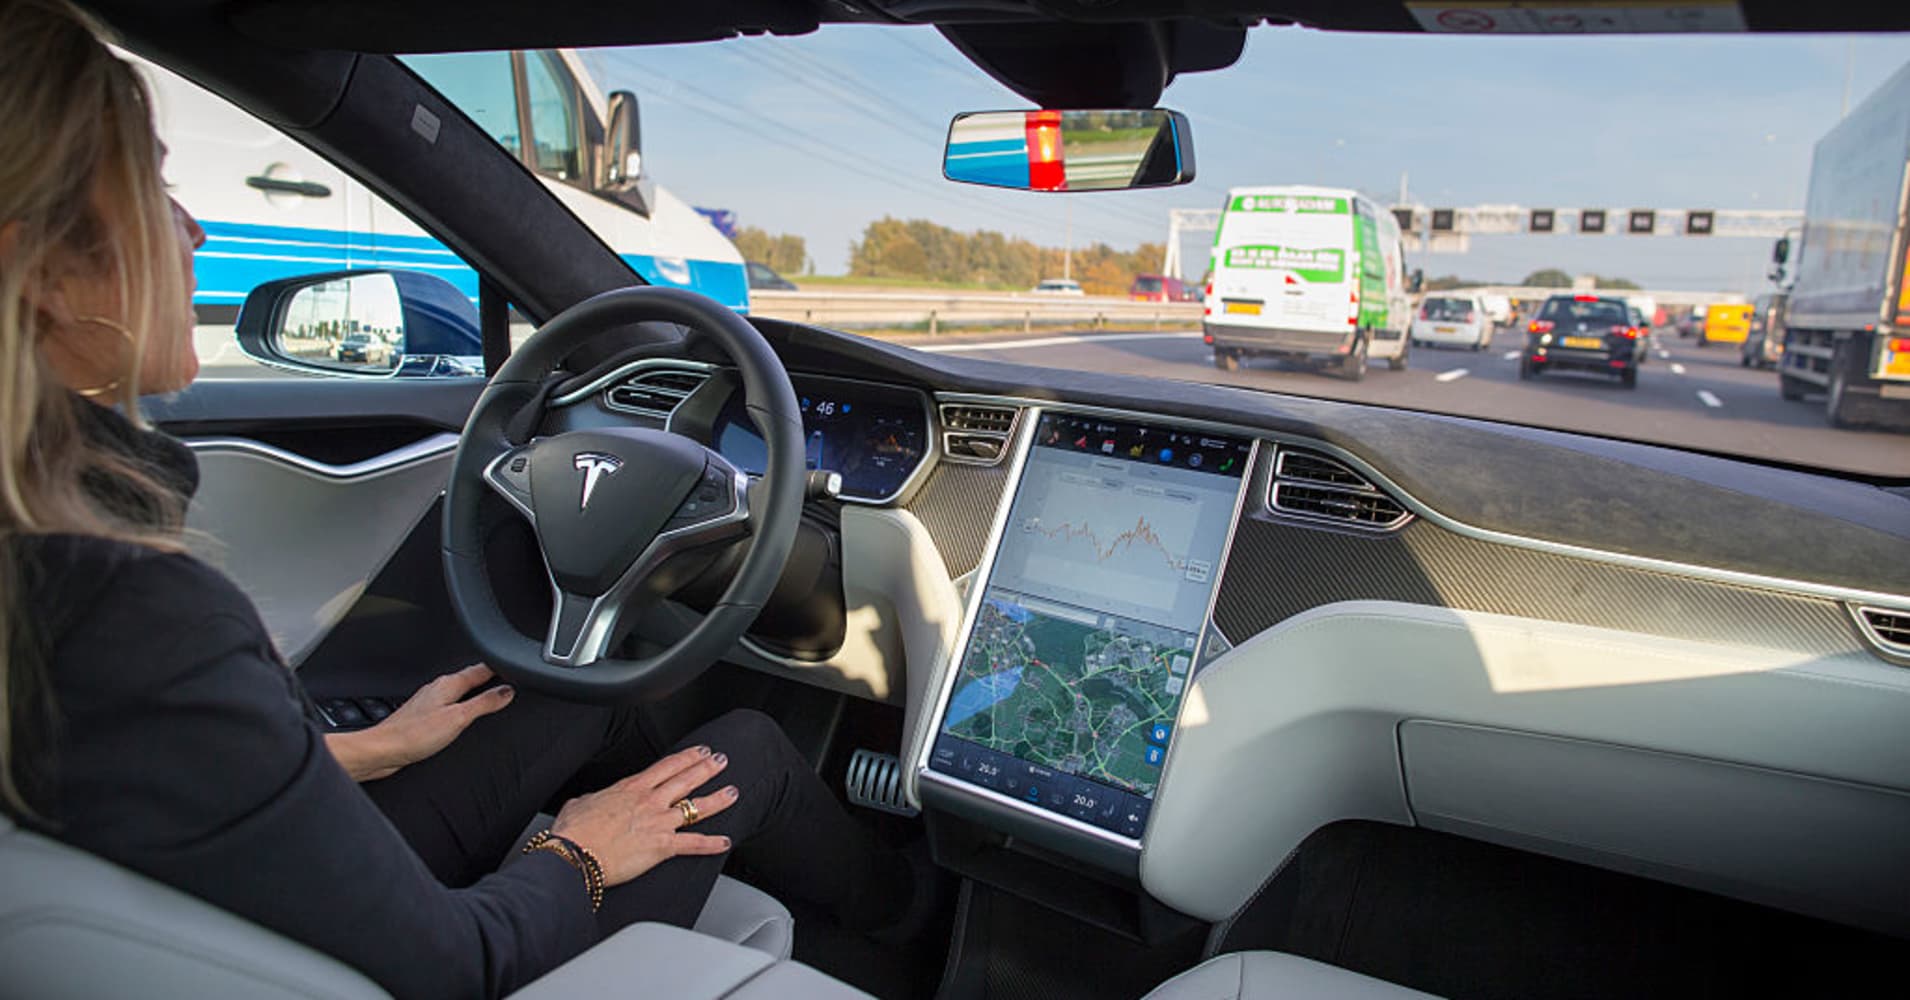 The problem with self-driving cars could turn out to be humans